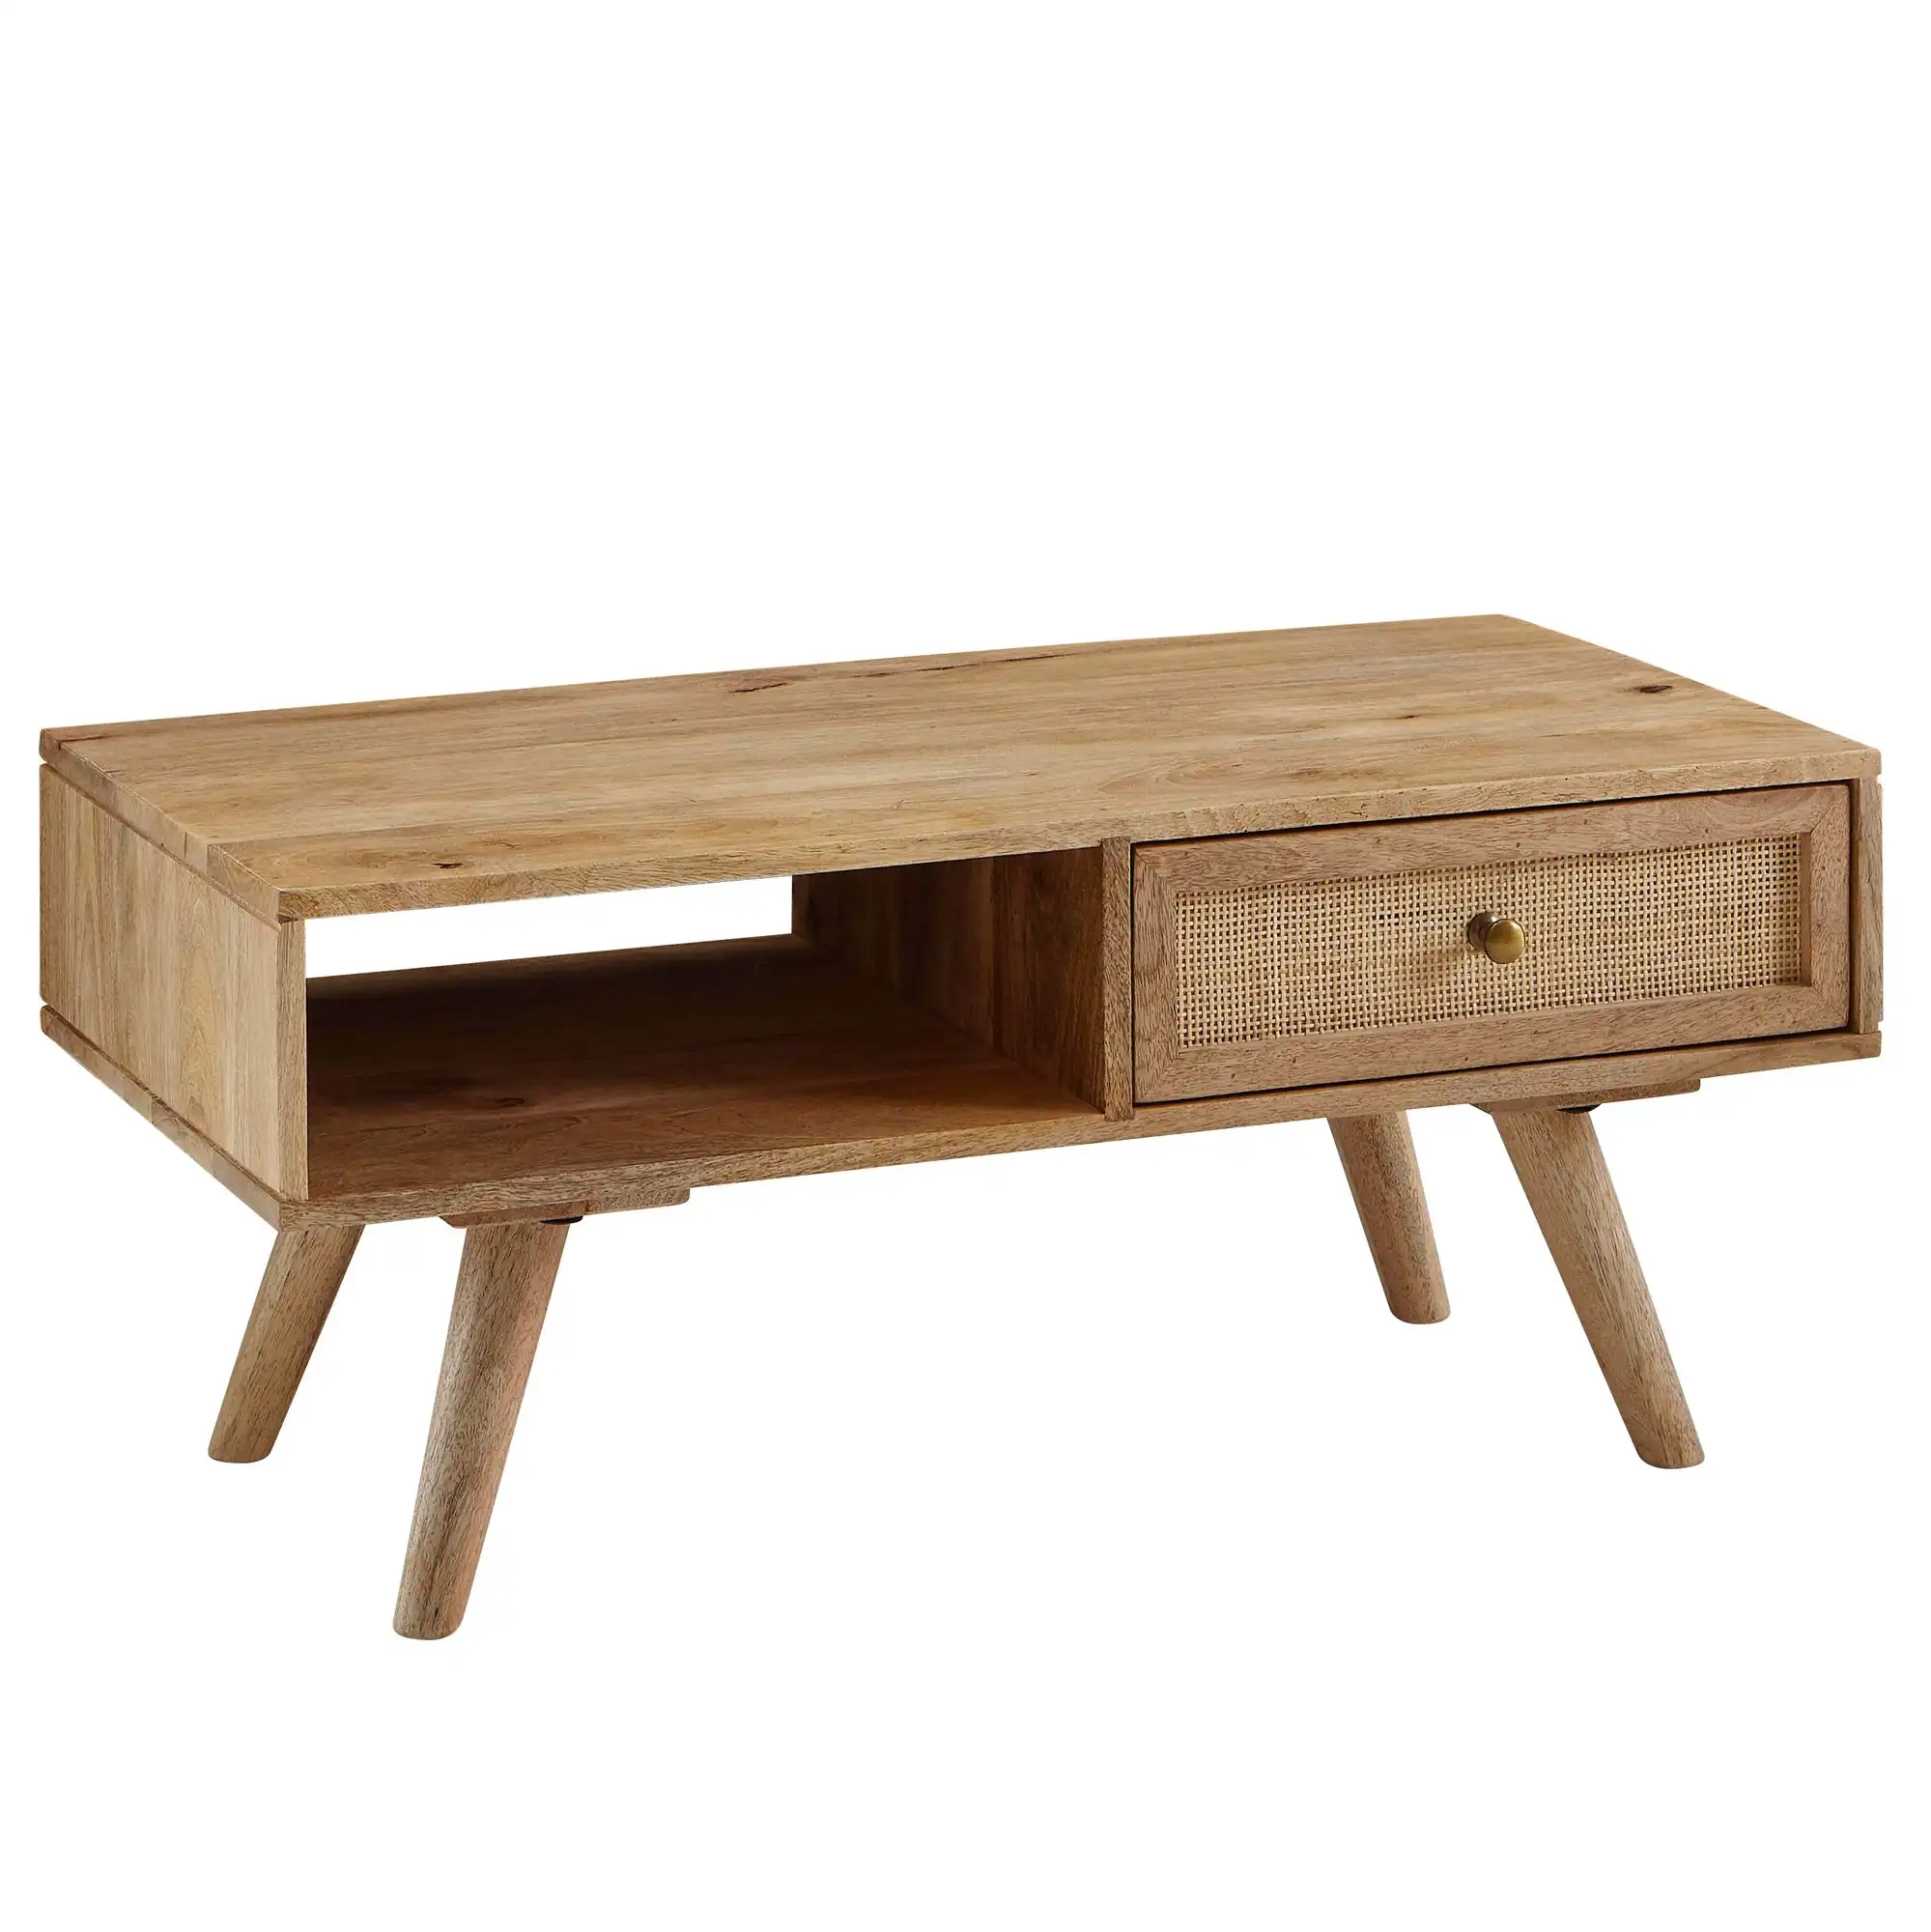 Mango Wood Coffee Table with 1 Both Side Openable Cane Fitted Drawer (KD) - popular handicrafts